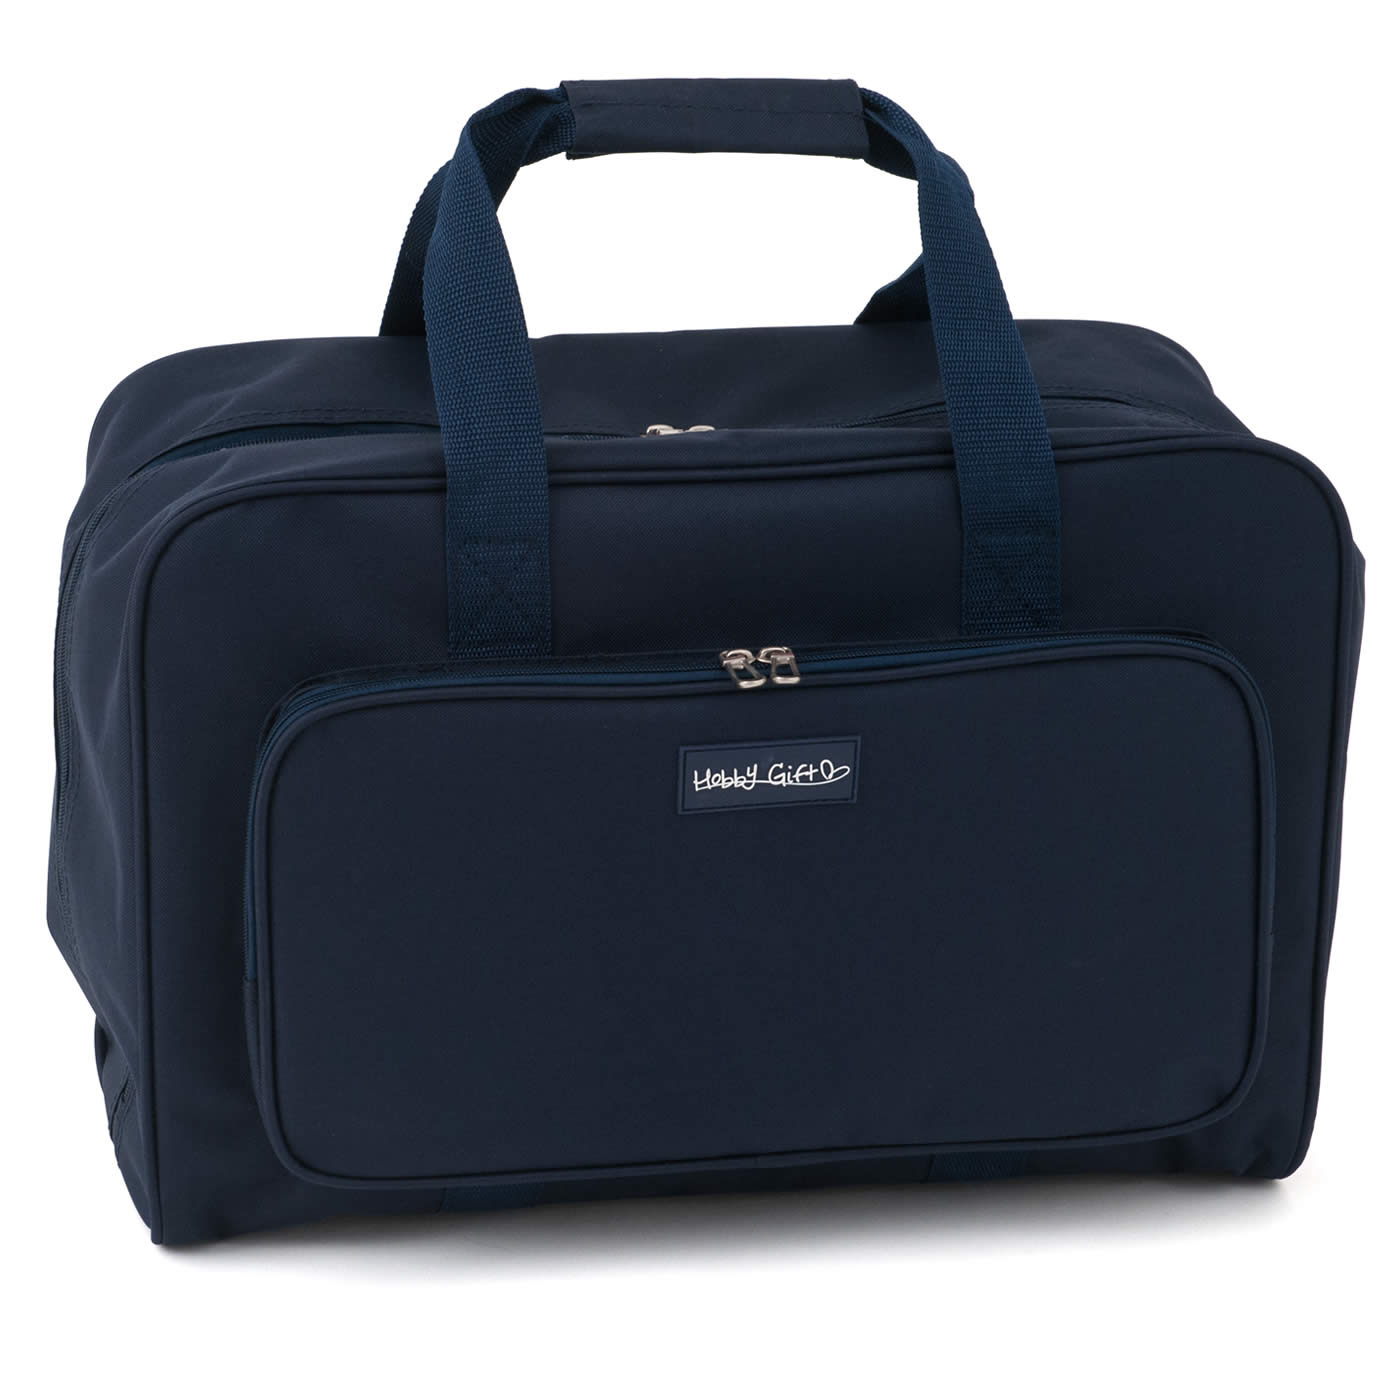 Carry Case to Suit Many Different Sewing Machine